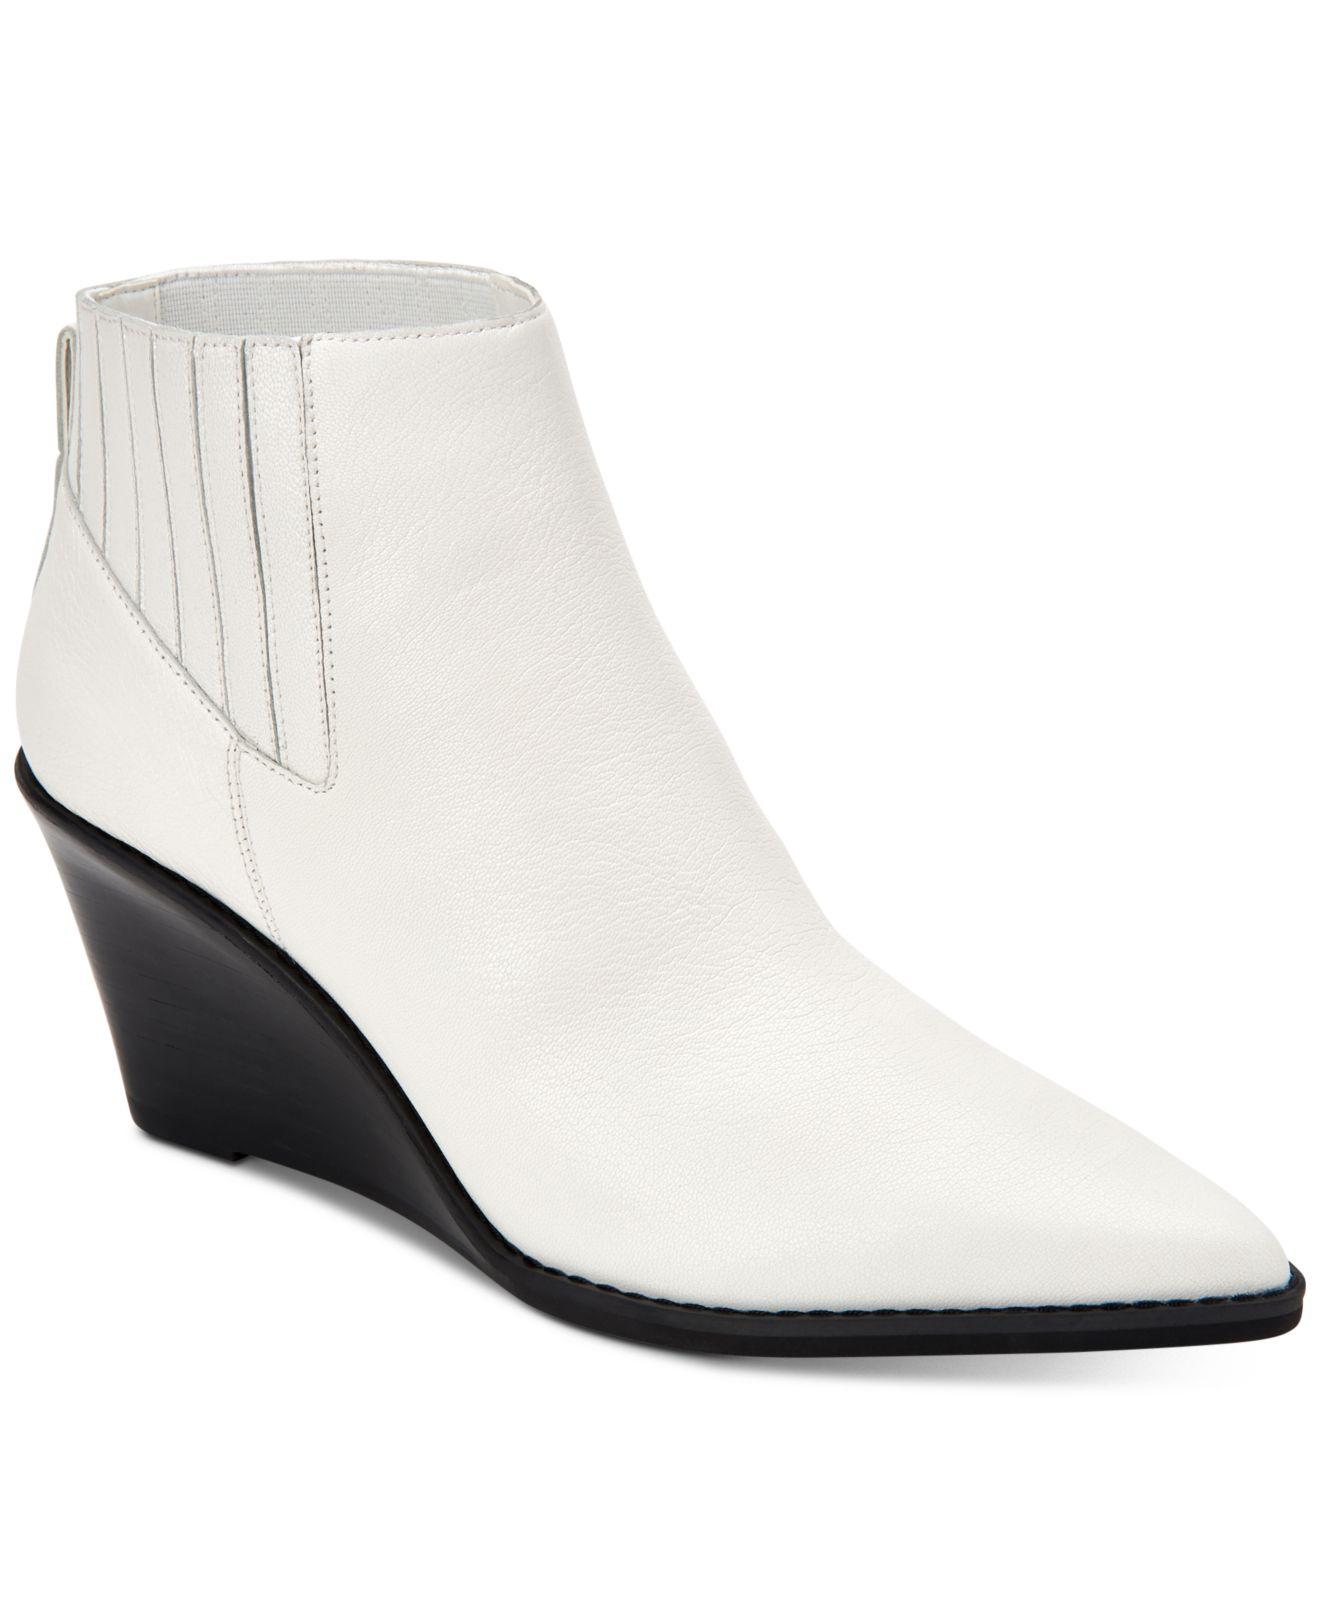 Calvin Klein Leather Tabby Booties in White - Lyst